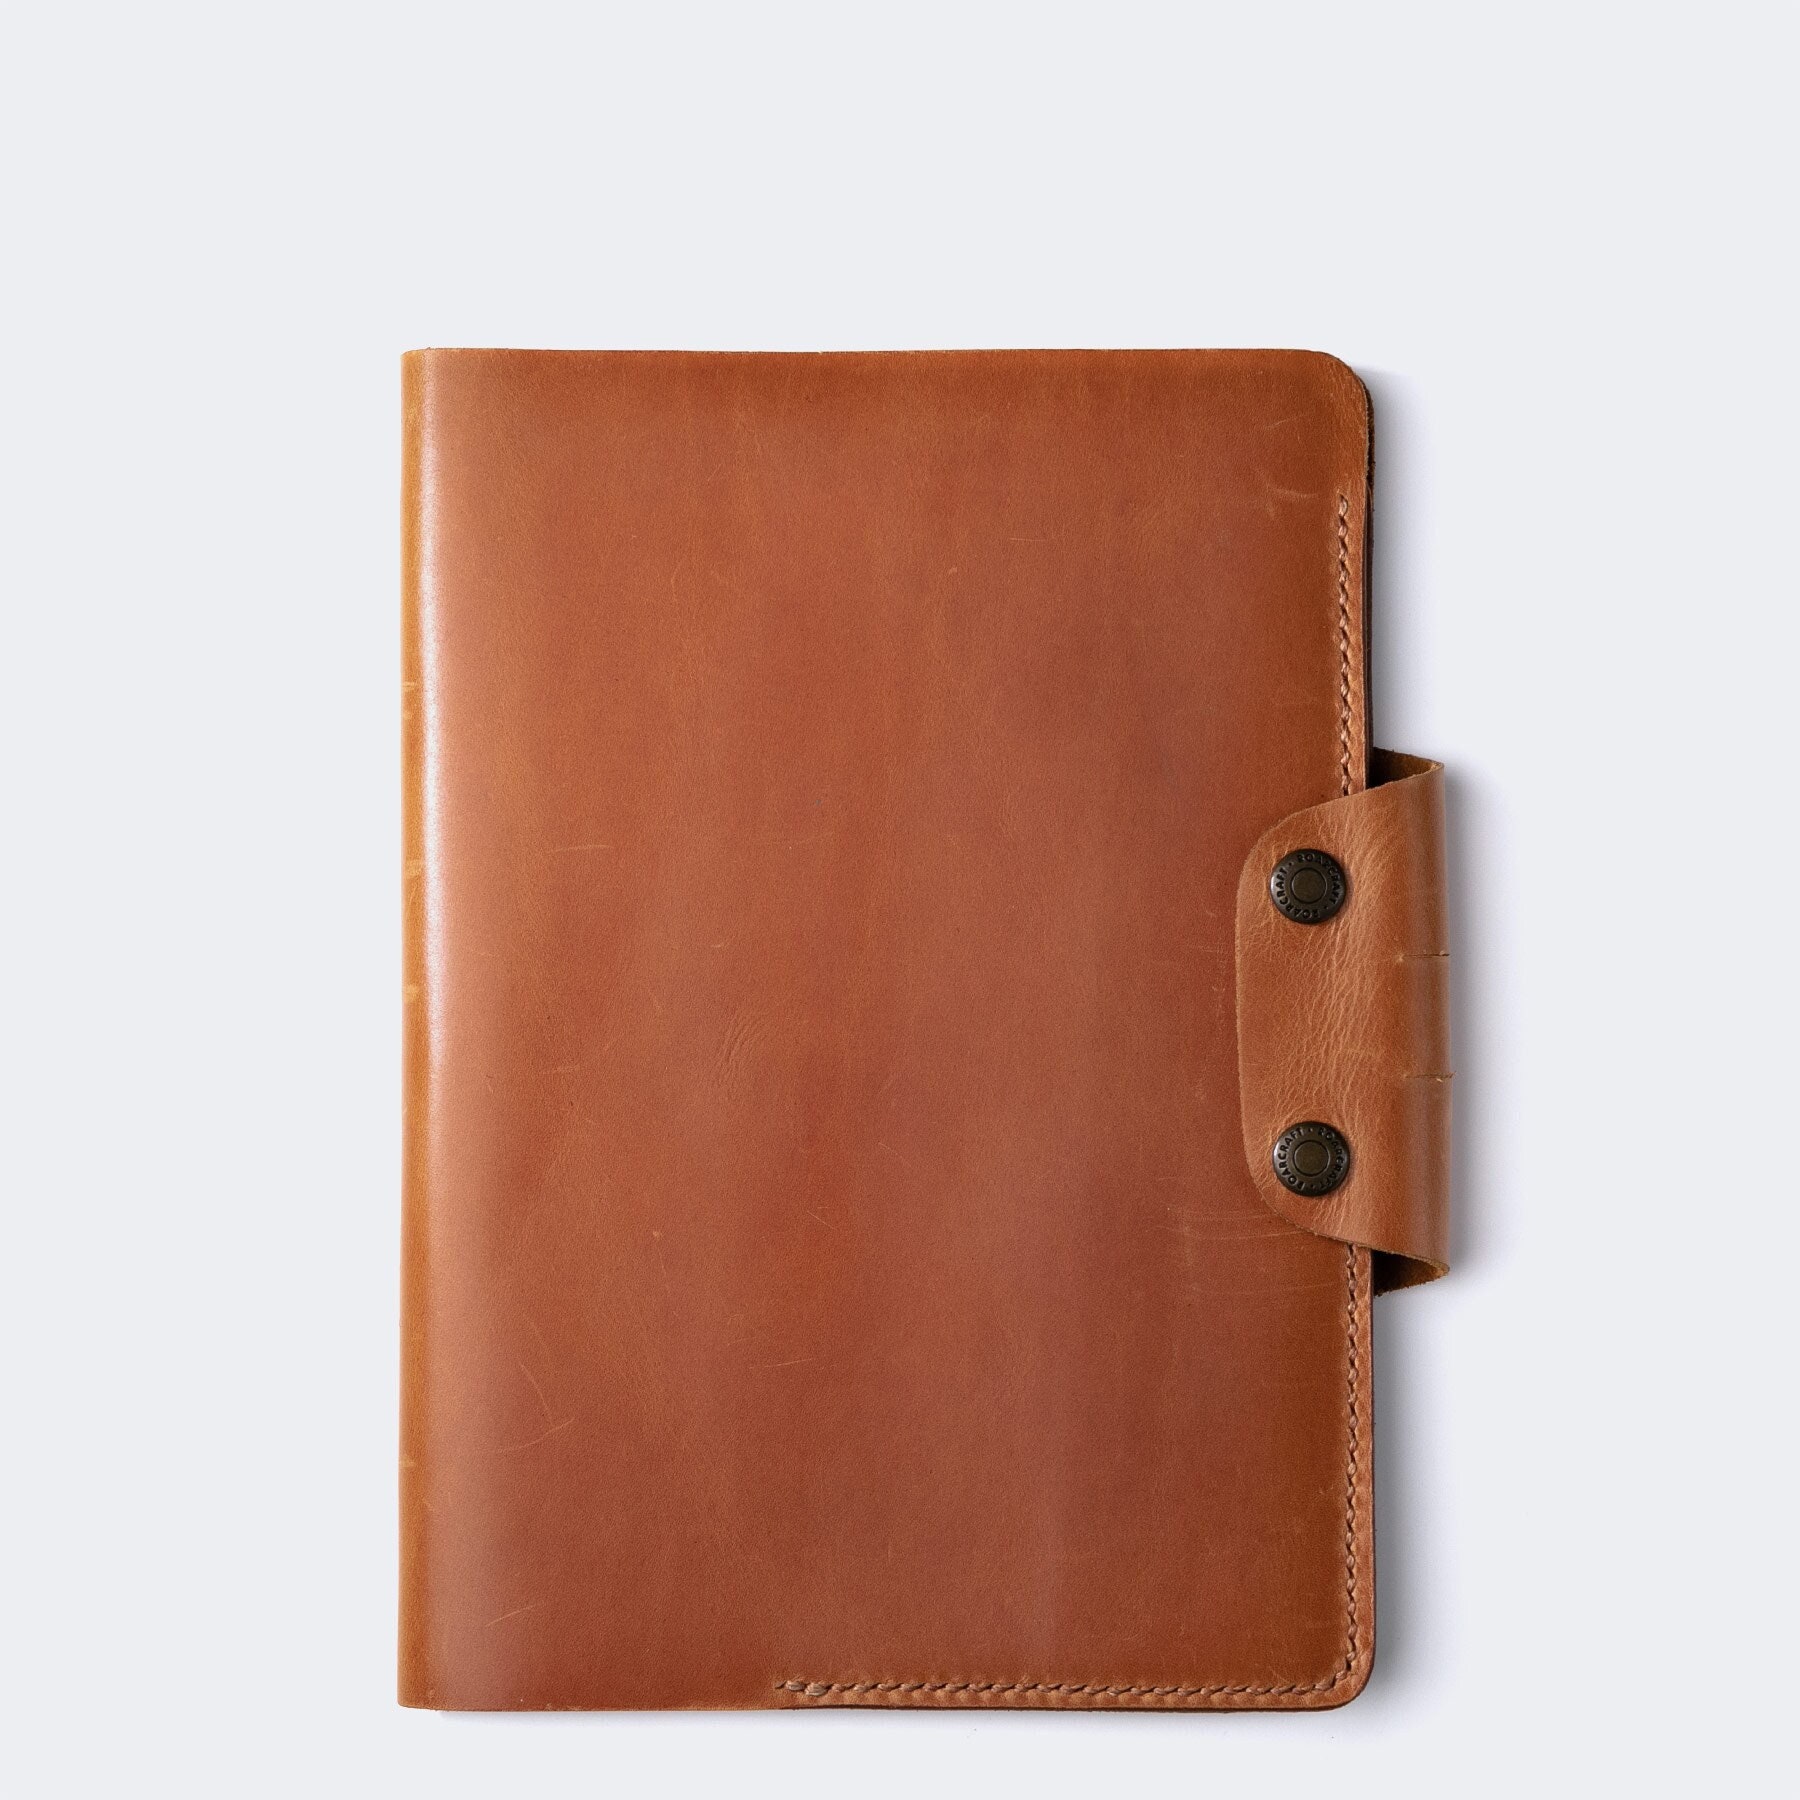 Multi Organizer with Credit Card Holder Full Grain Leather Journal Cover with A5 Writing Notebook Lined Pages Fits A5 Size Notebooks Pockets and Pen Refillable Leather Notebook Cover for Men